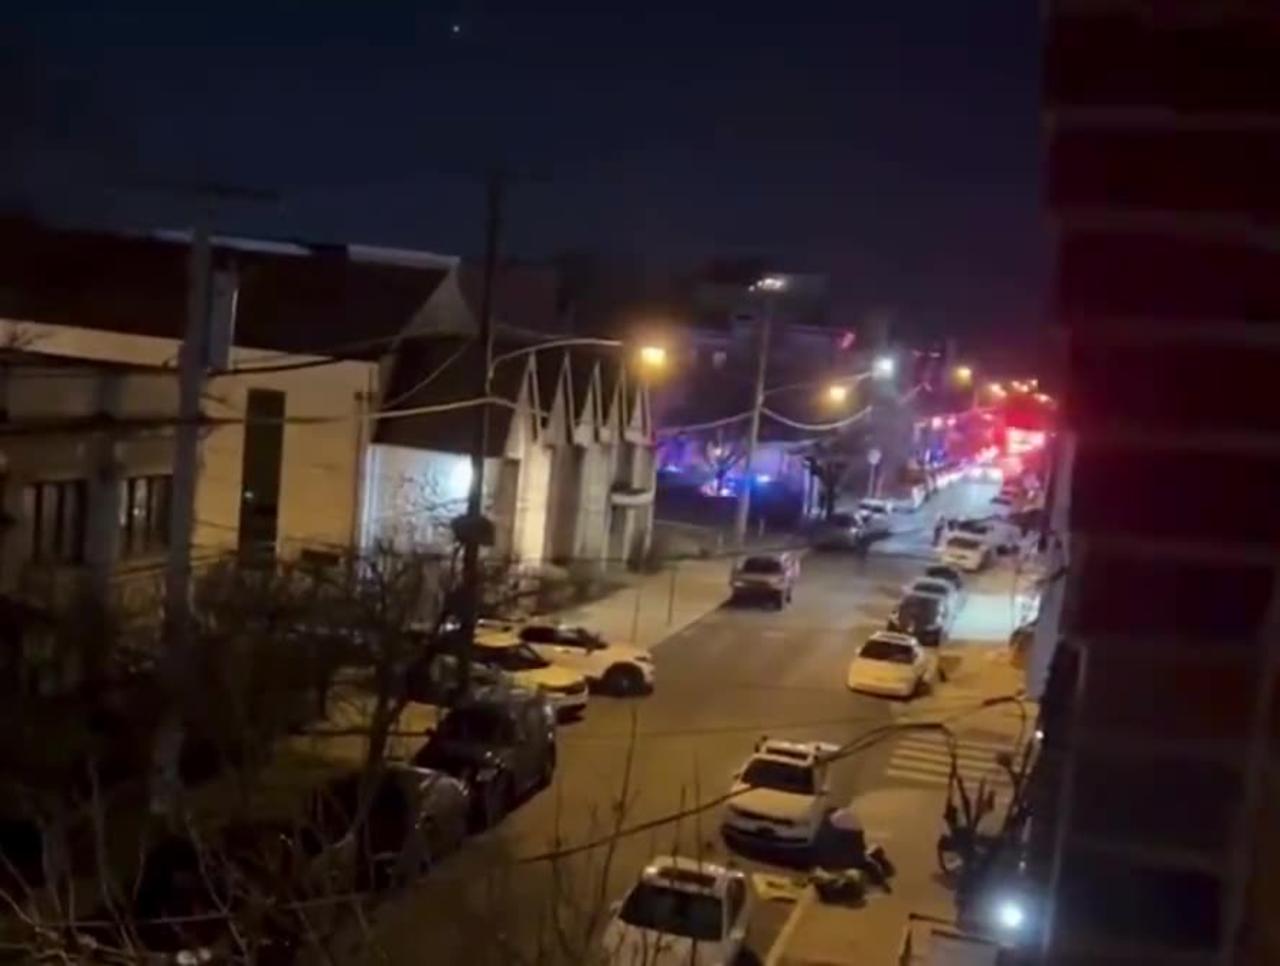 A police officer was shot and killed in Philadelphia, Pennsylvania